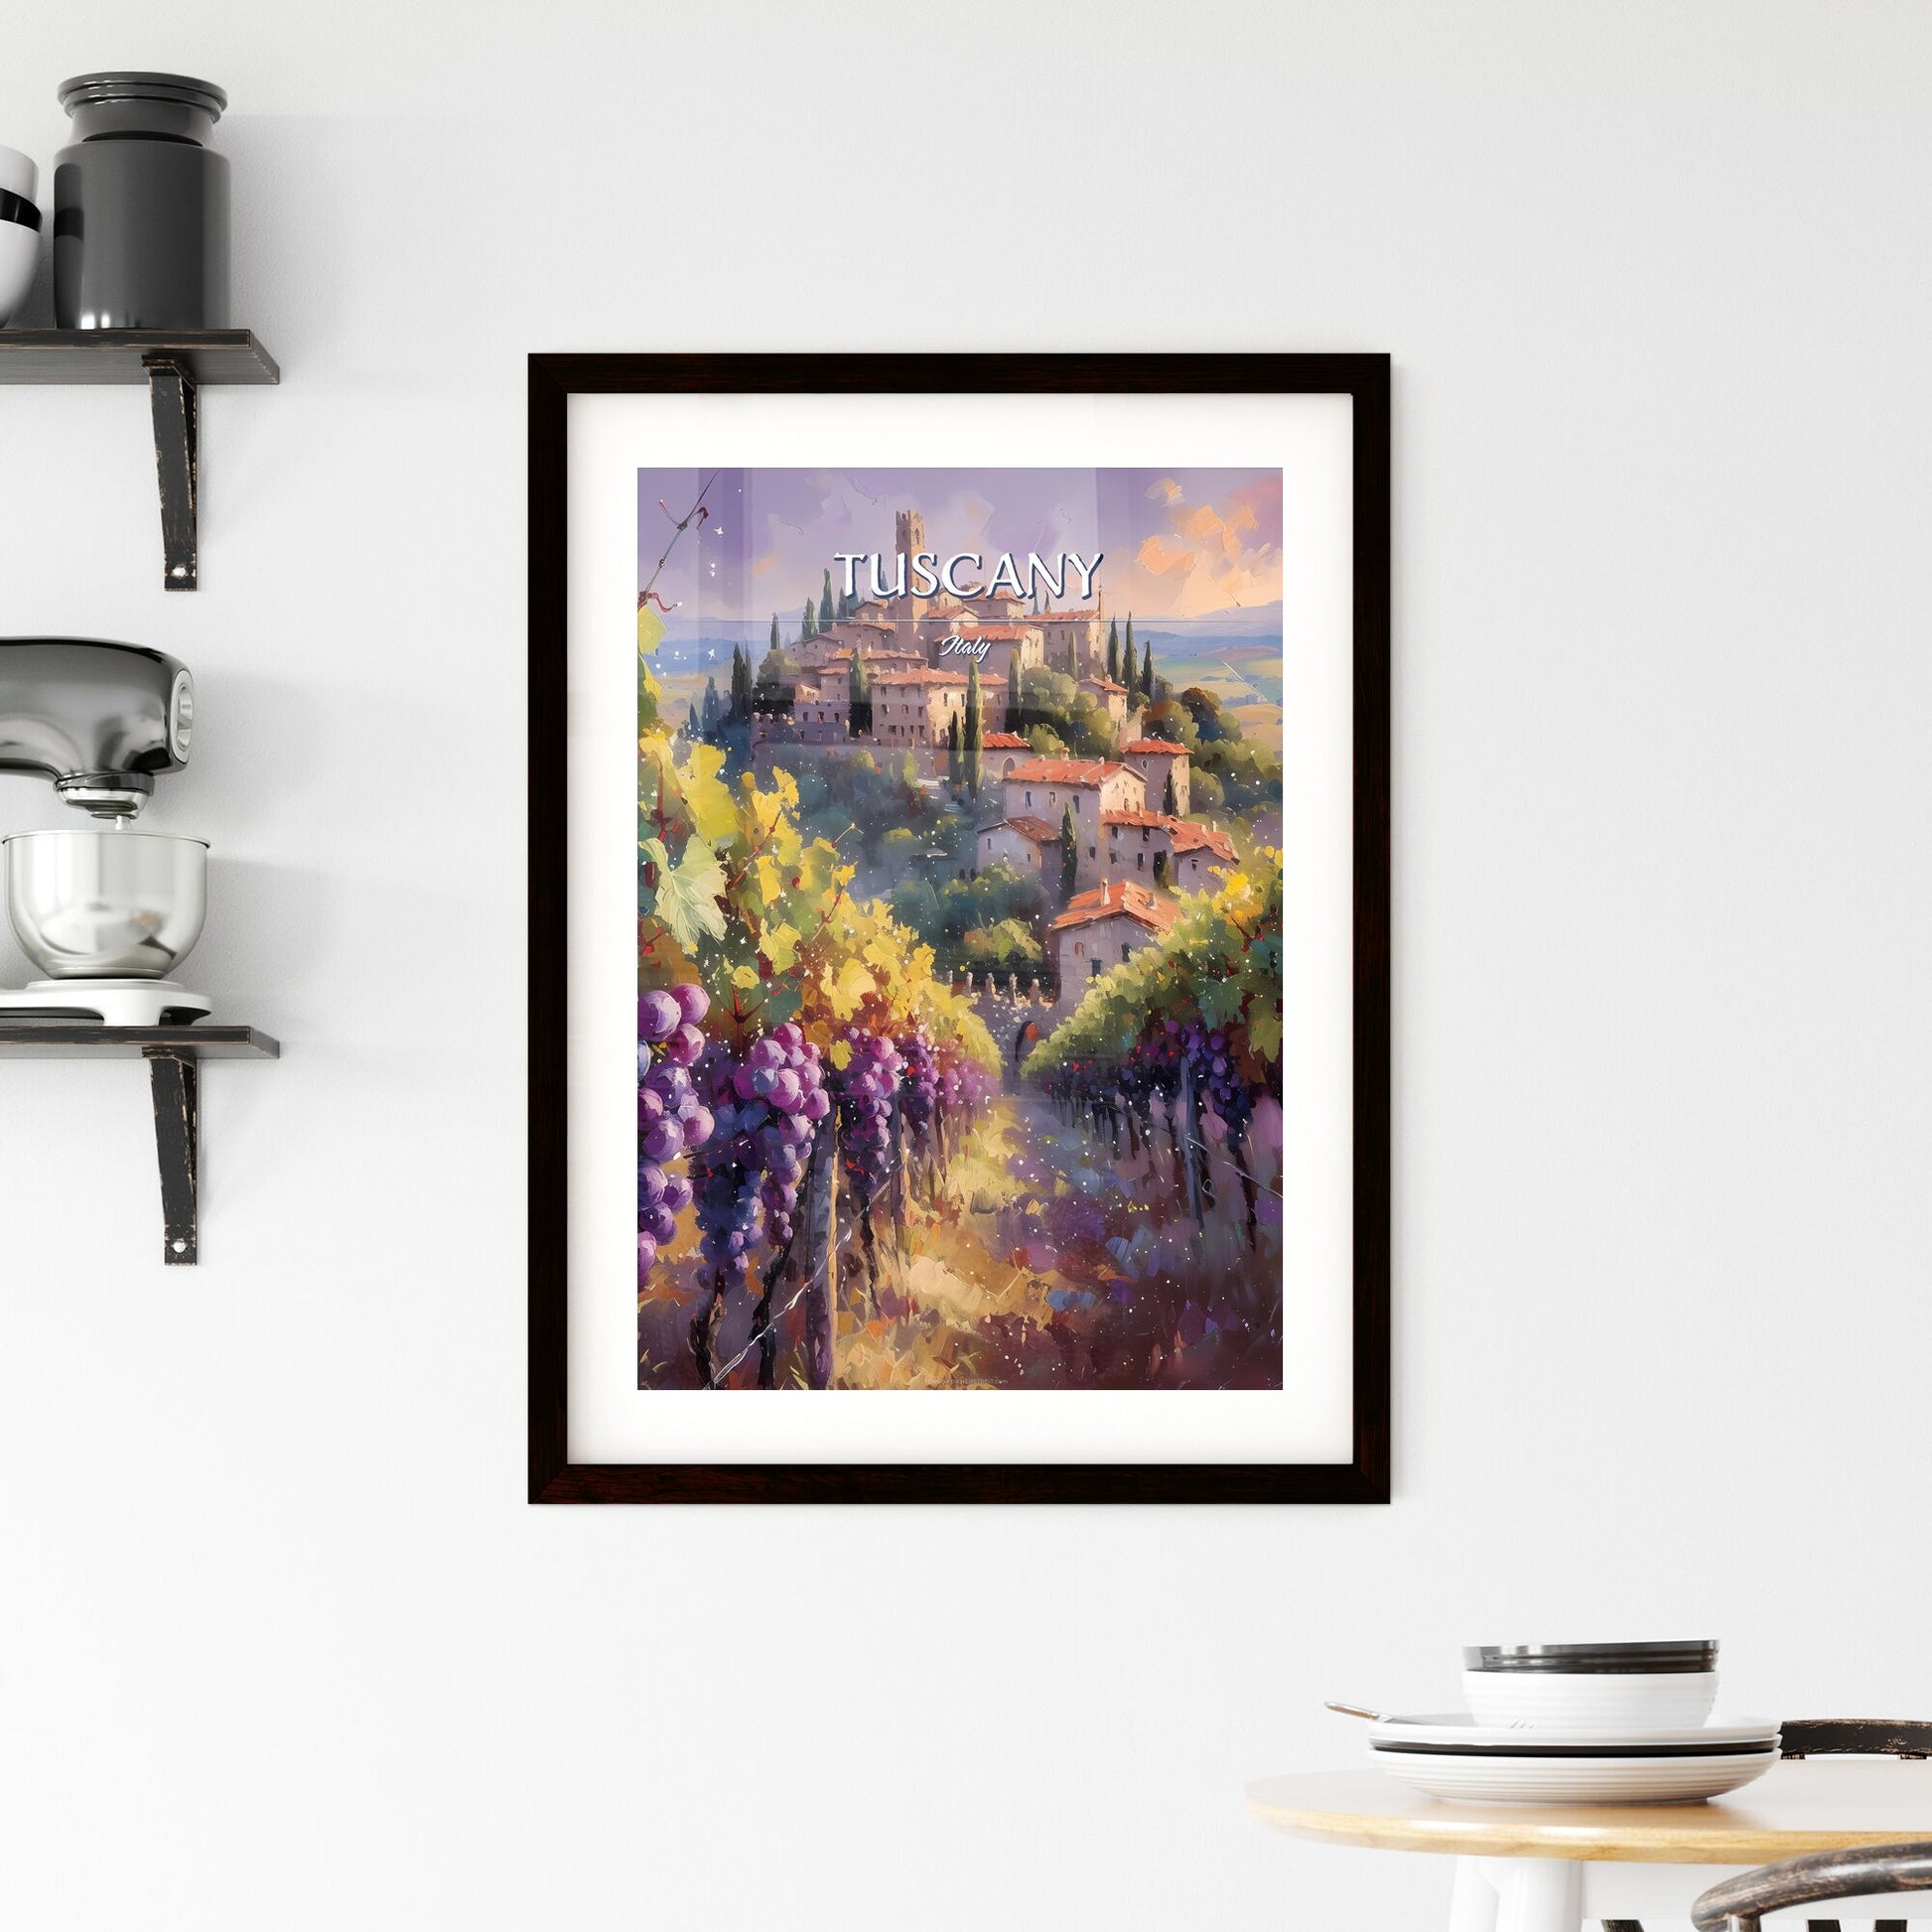 Tuscany, Italy - Art print of a painting of a town on a hill with grapes Default Title